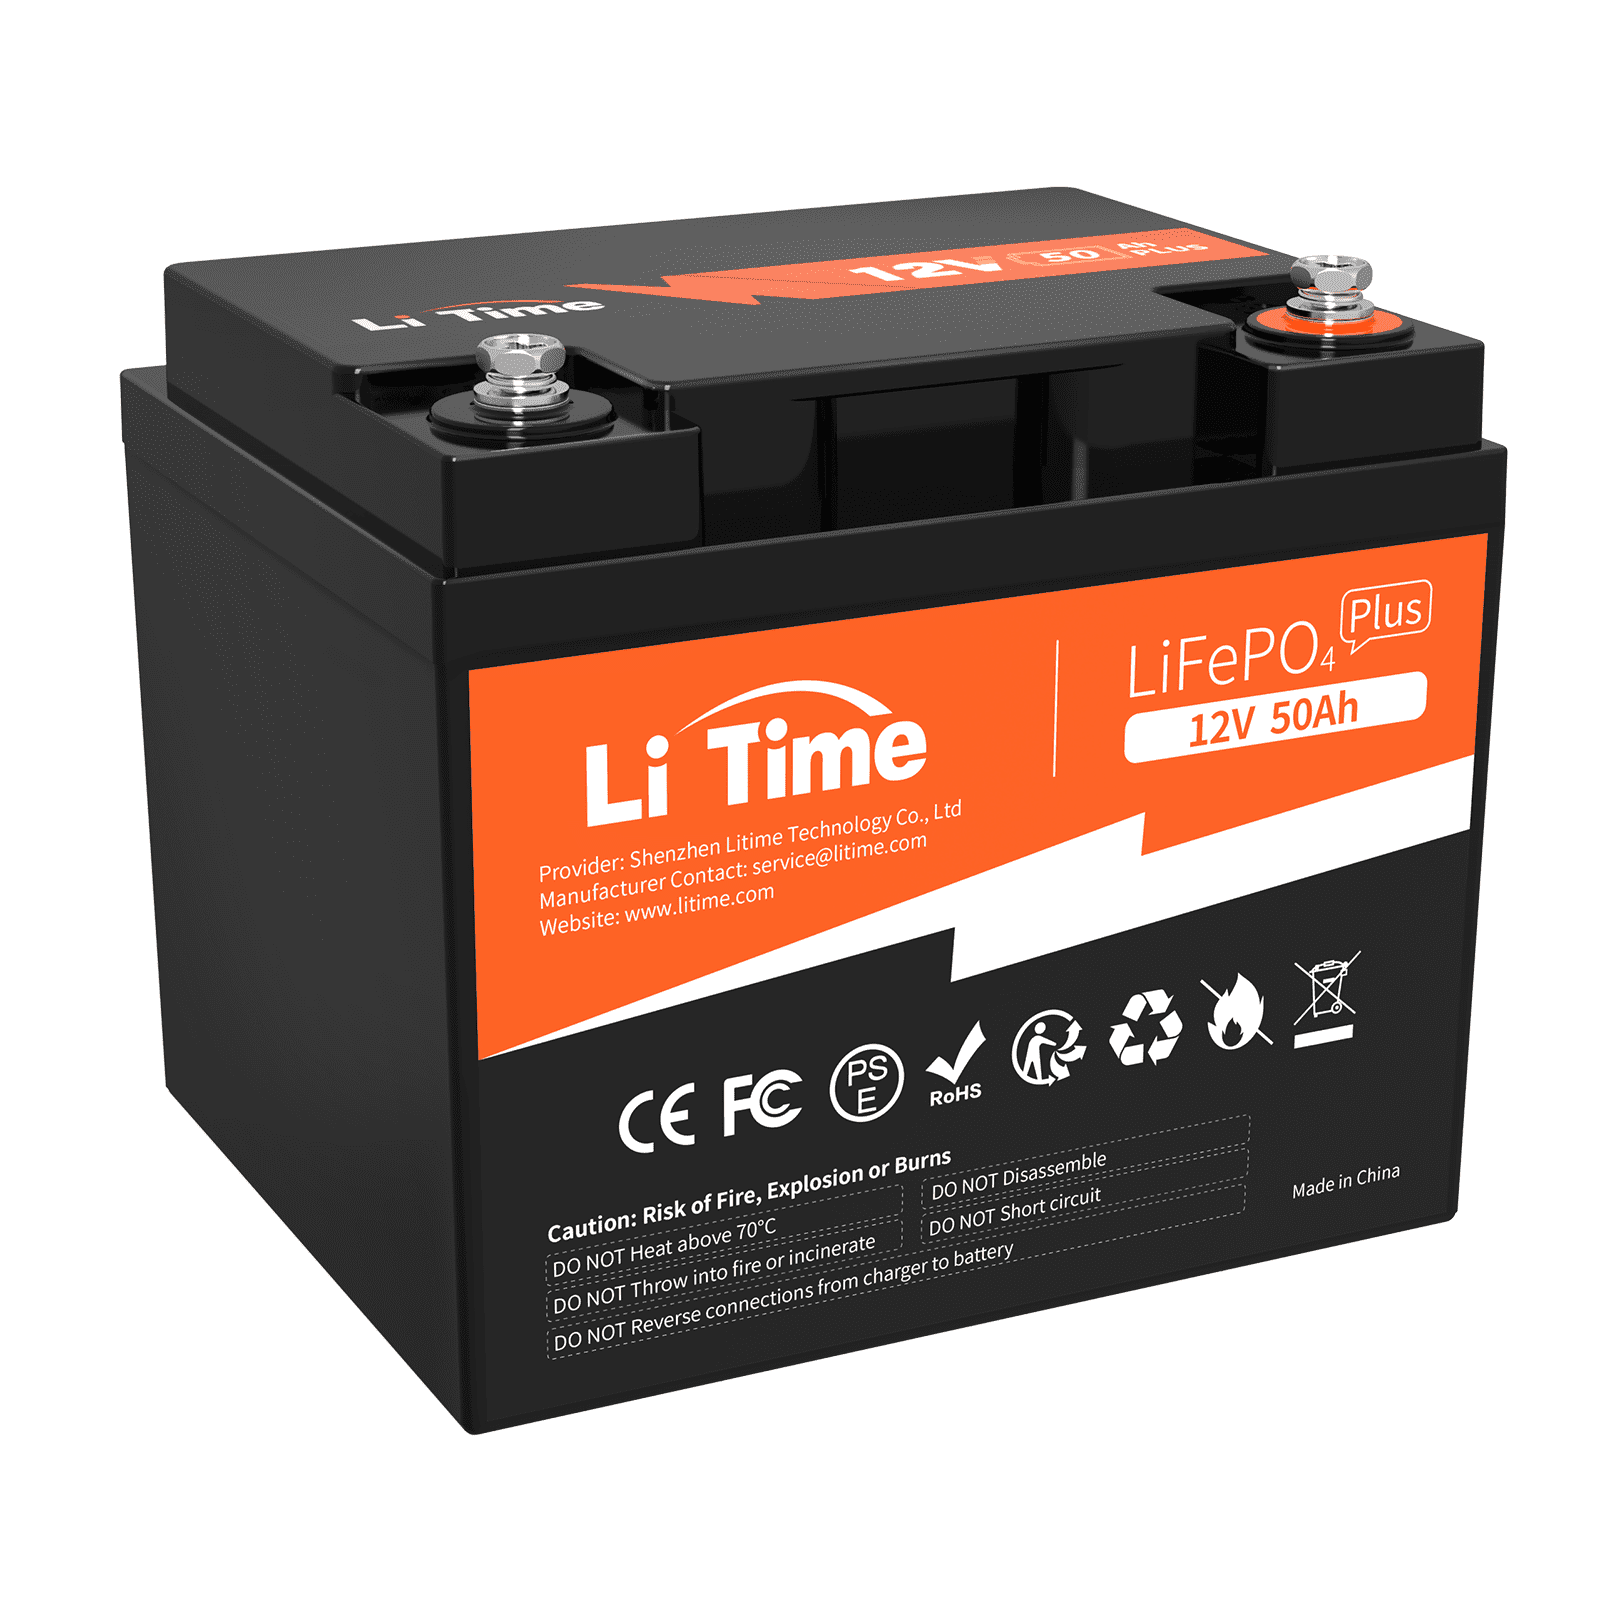 LiTime 12V 100Ah Mini LiFePO4 Battery Pre-Sale Exceeded 6000 Units, $30 Off  Still Available